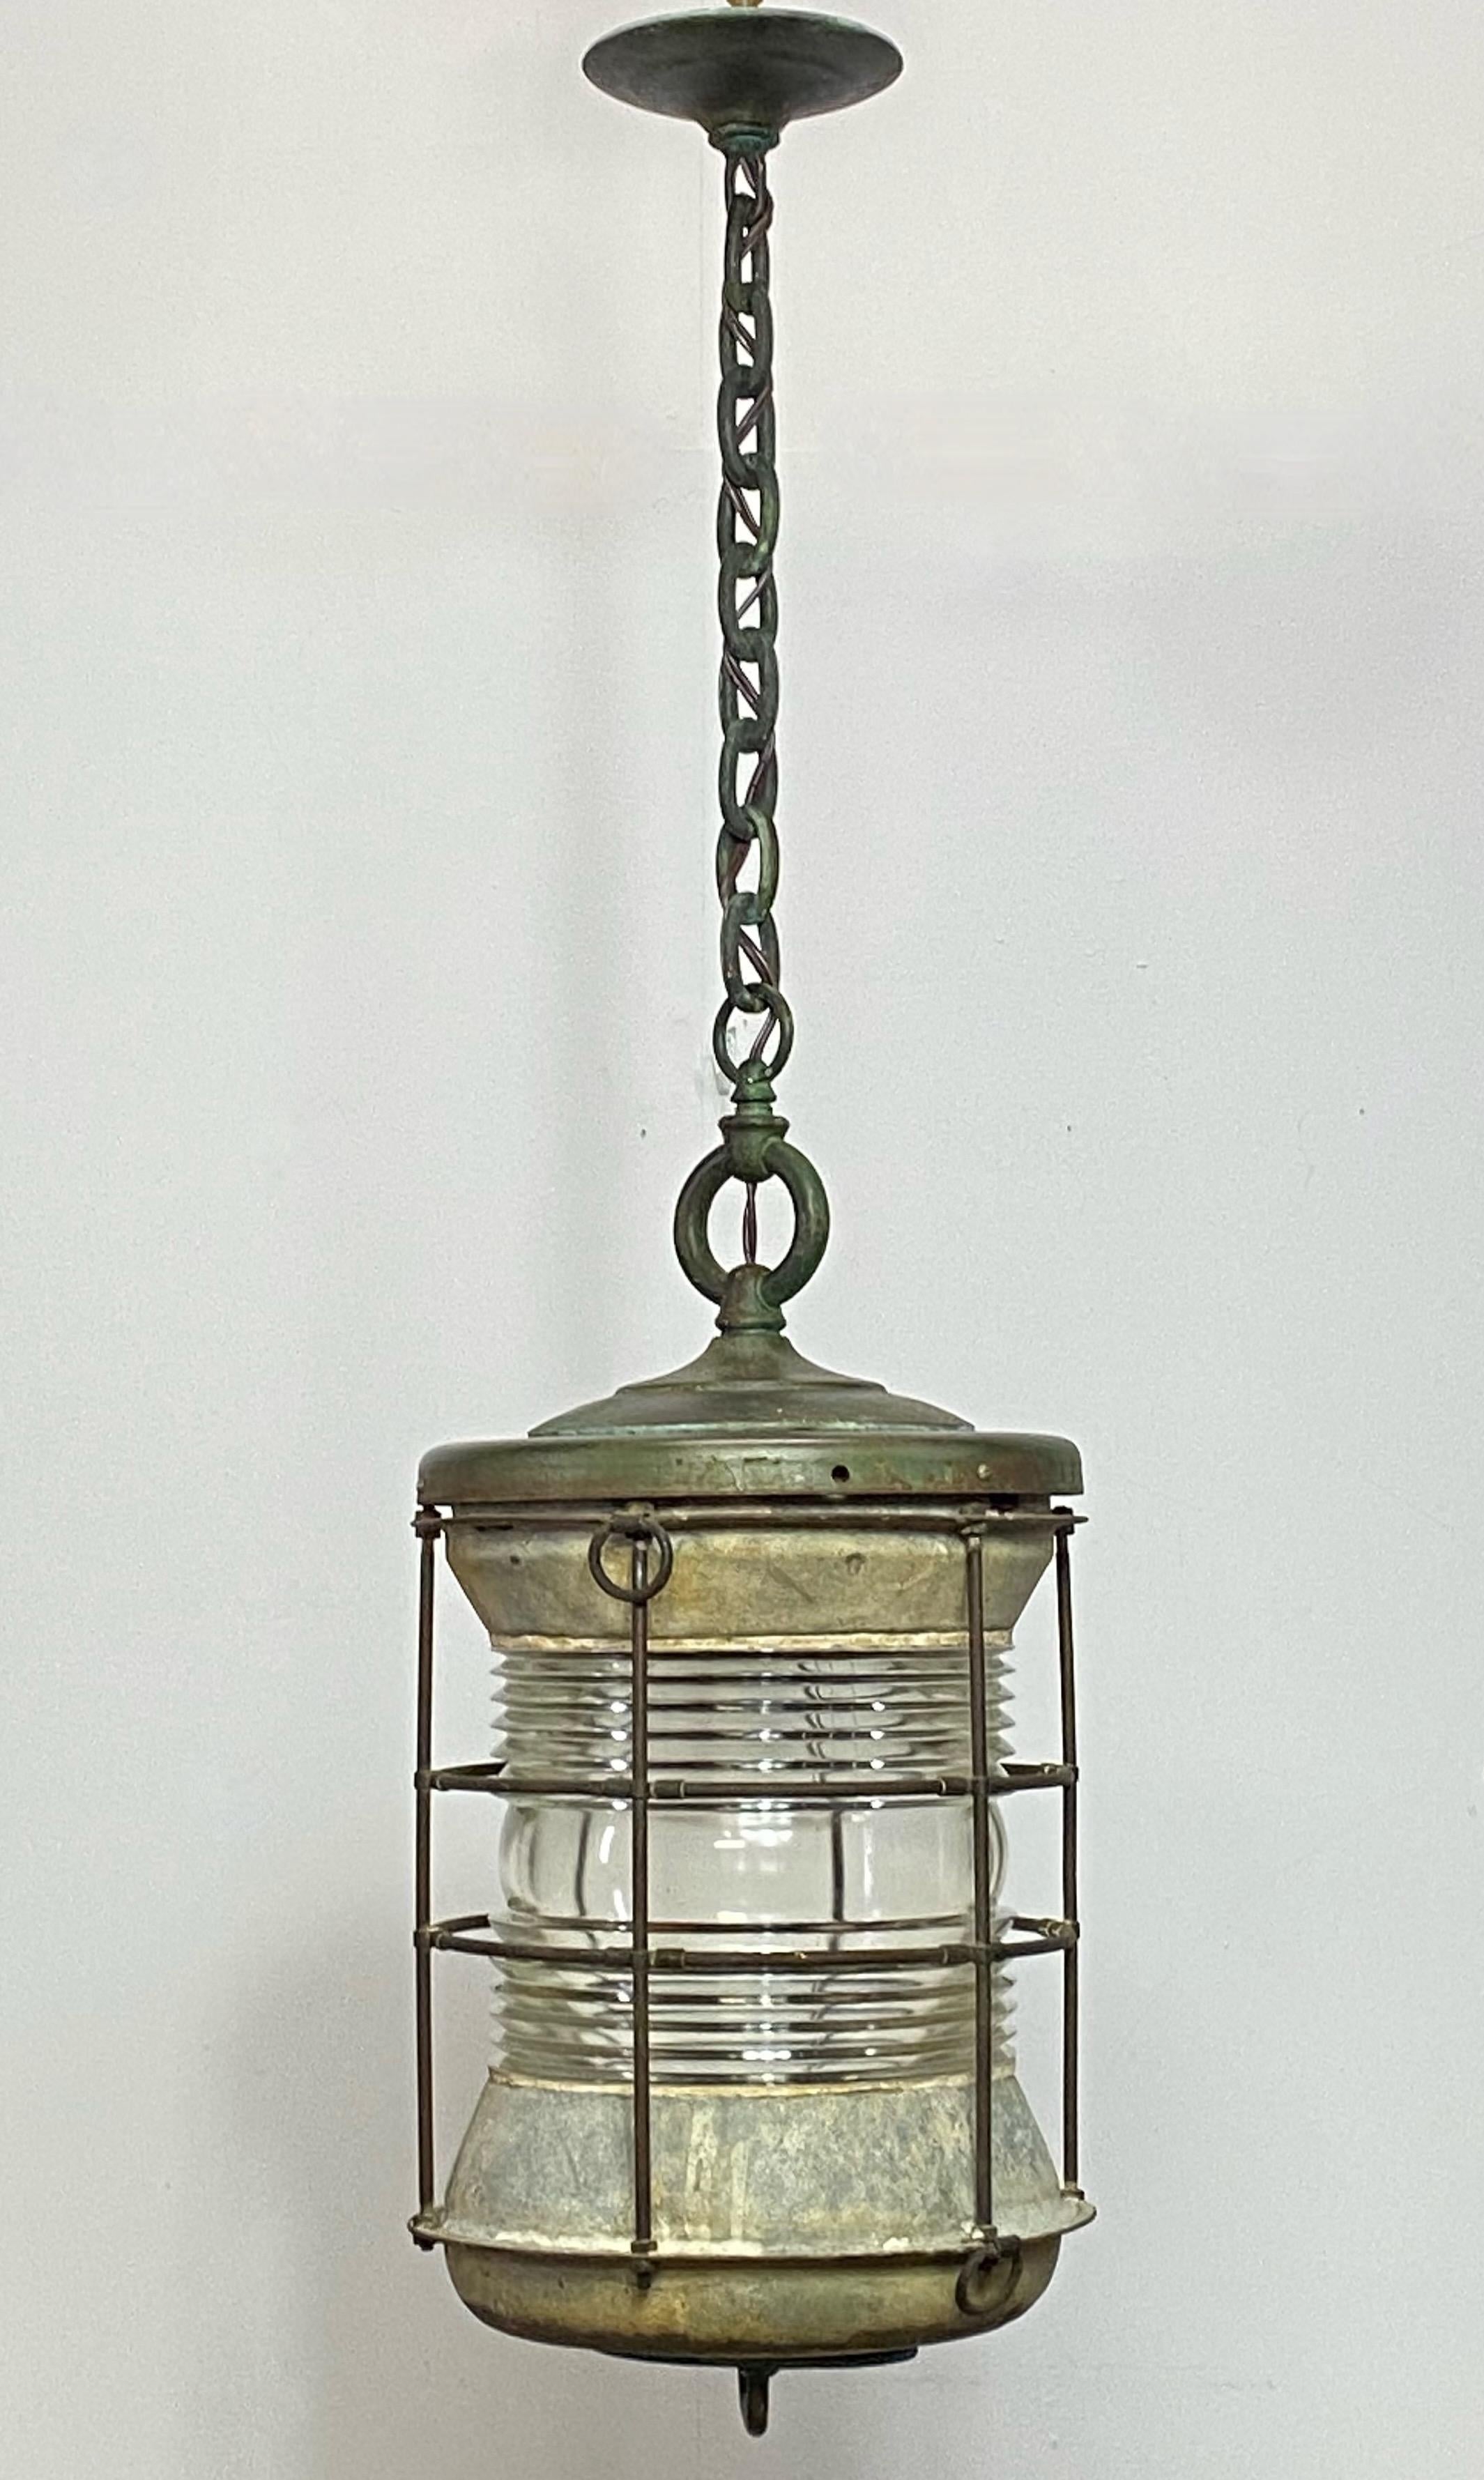 A large antique brass, glass, tin and steel ships' lantern with antique bronze chain.
Recently re-wired and ready to install. We can shorten the chain to clients specifications.
American, early 20th century.